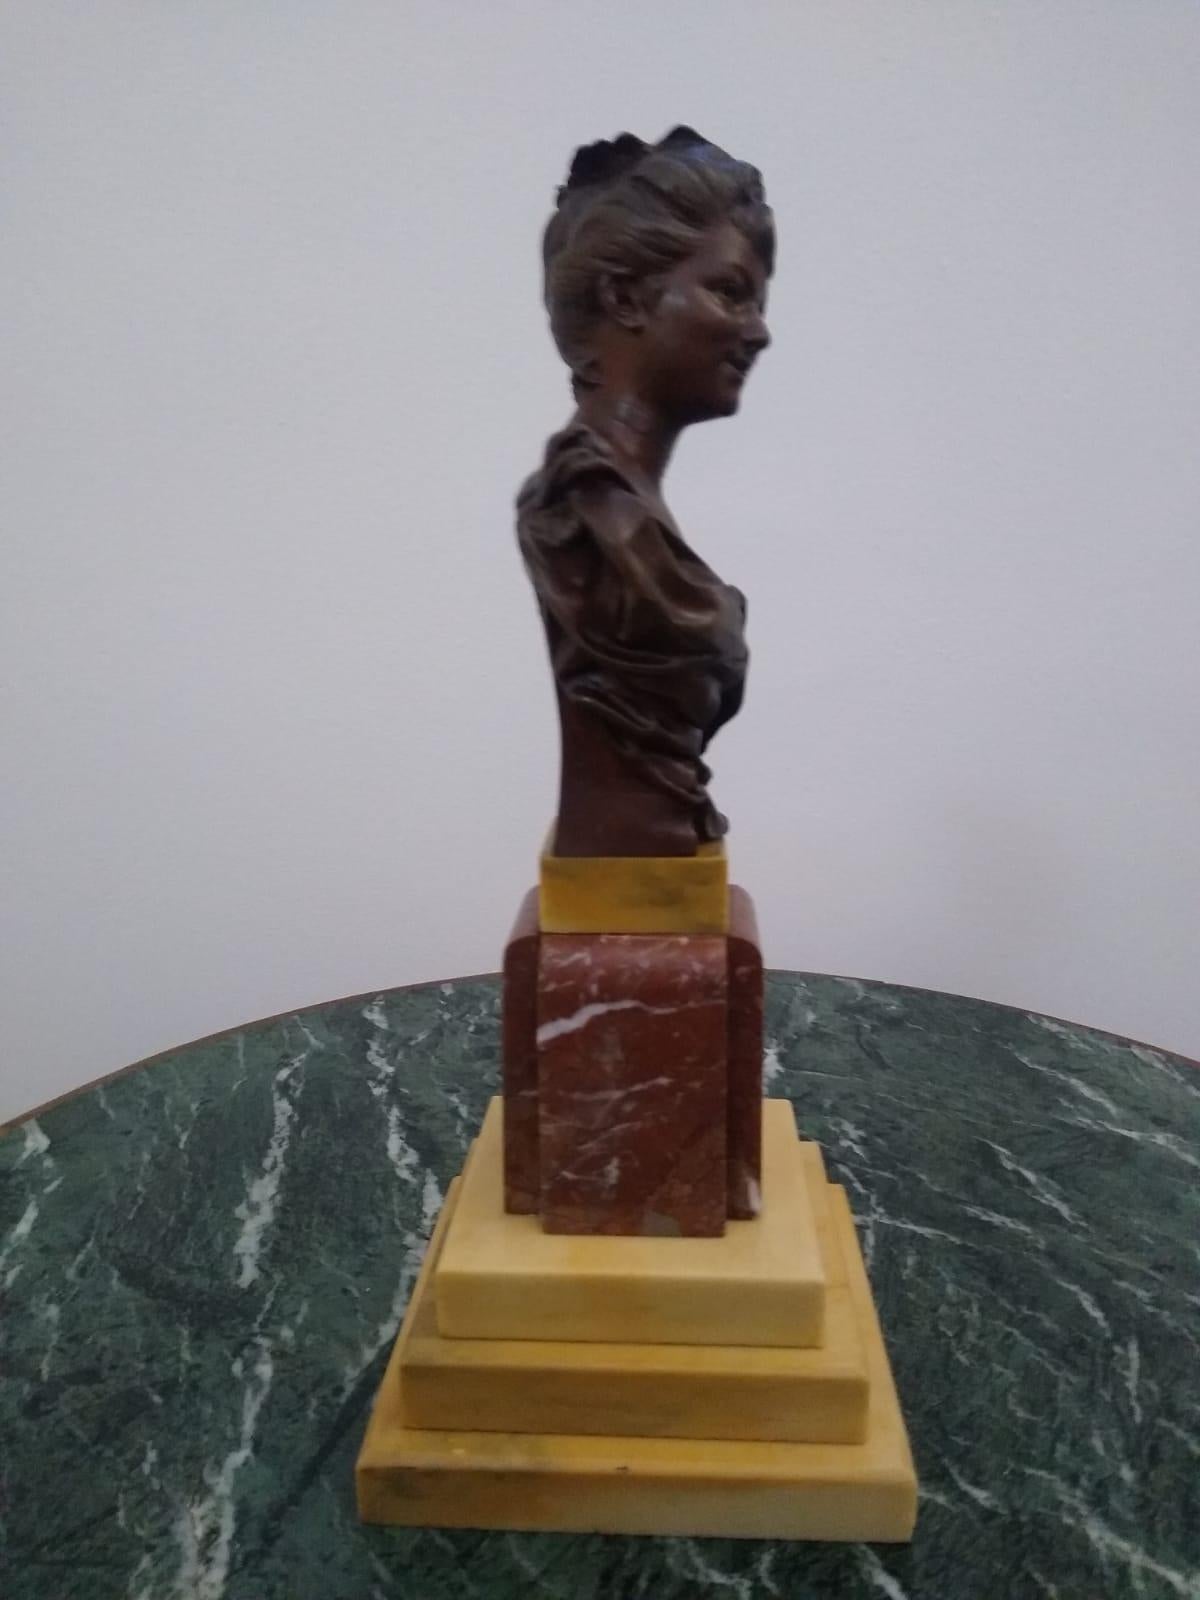 A charming bust of a young lady , it is executed in the lost-wax method in a single piece mounted on a base of different tones of marbles.  The surface is finished in reddish-oxide toned patina. 
Casting from the first quarter of the 20th century.